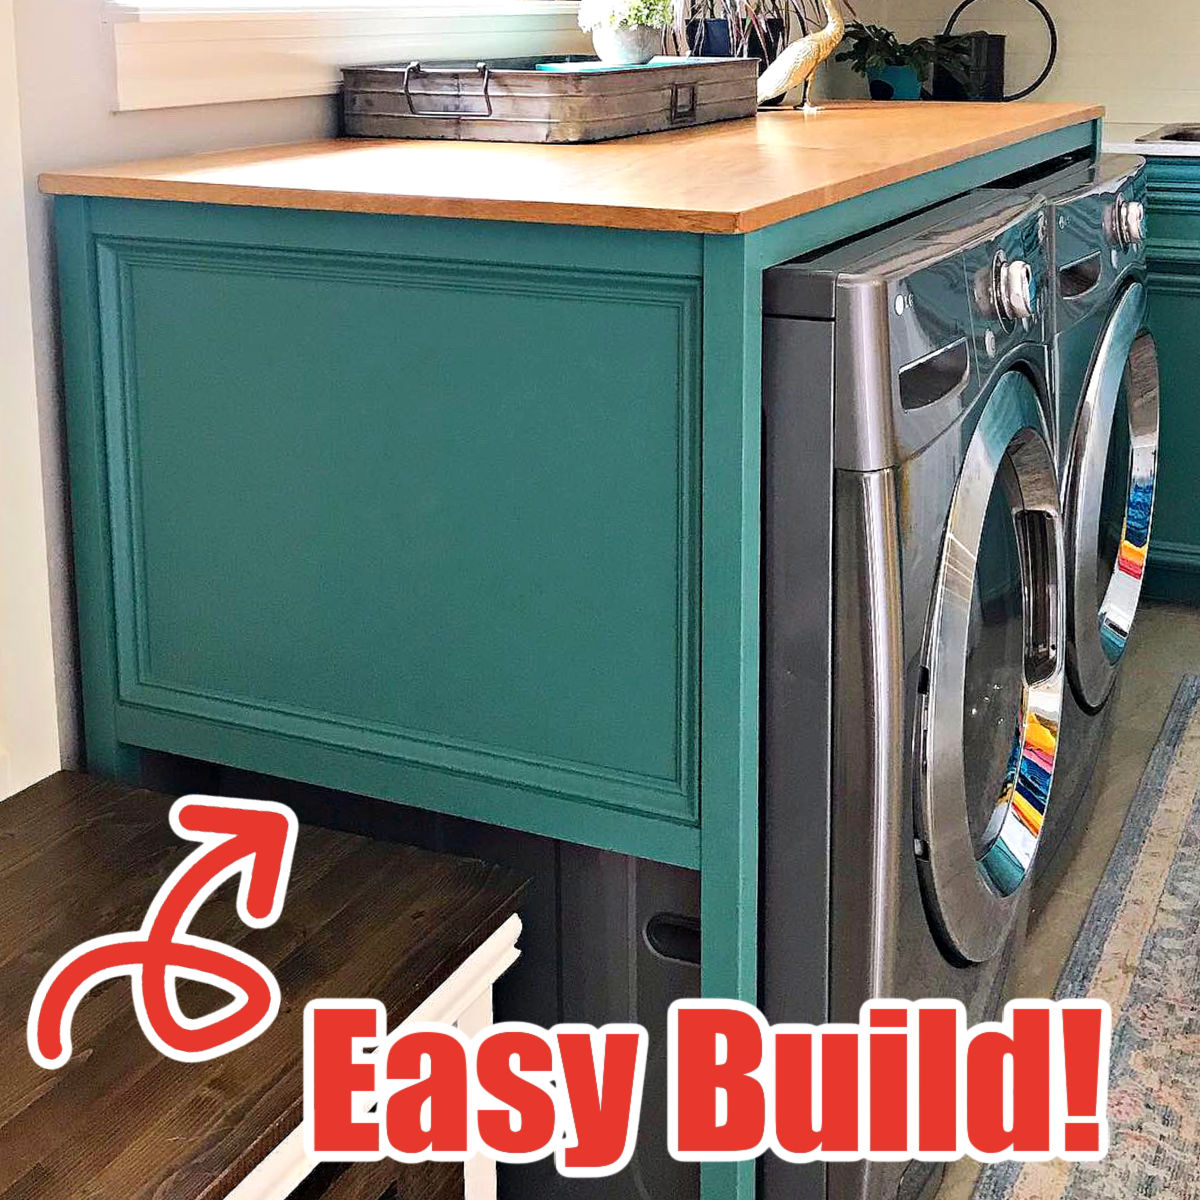 Easy DIY laundry shelf over washer and dryer